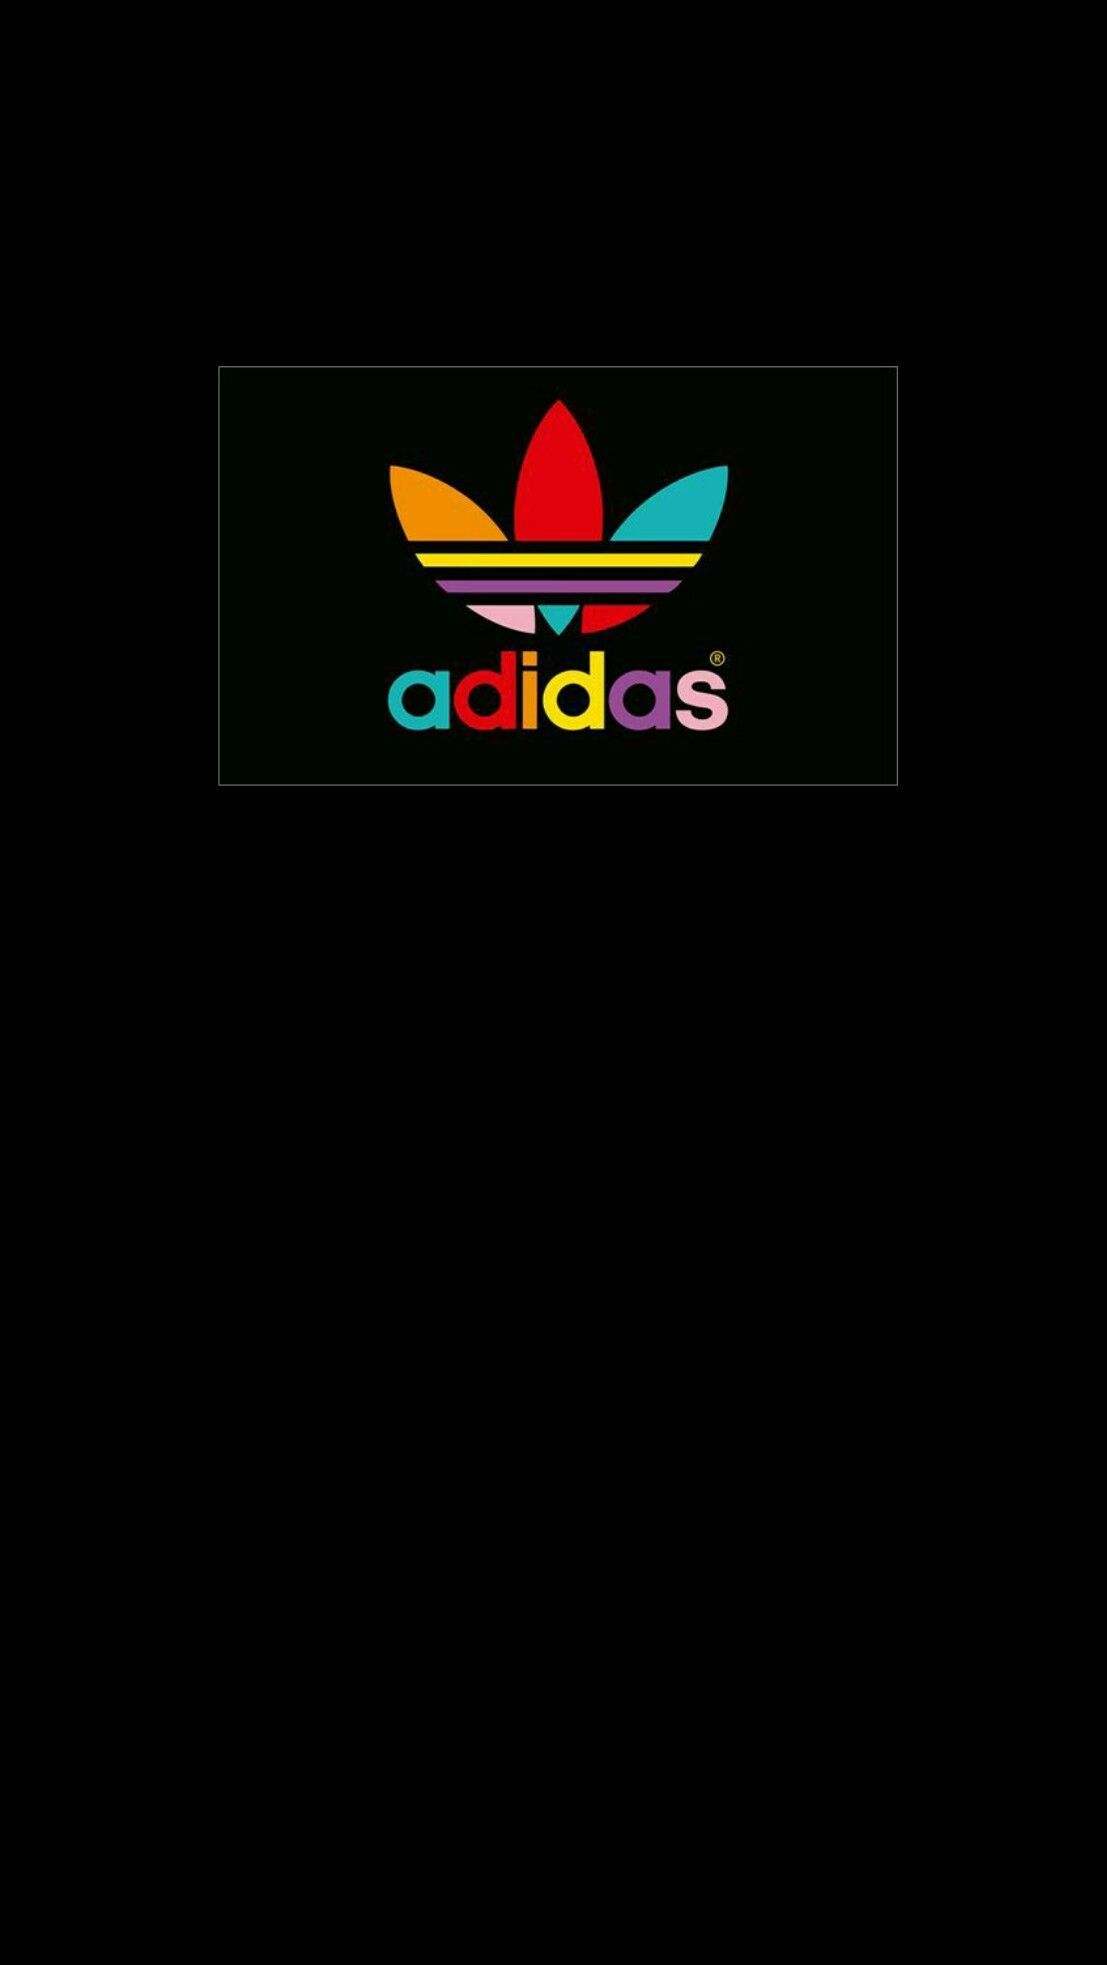 adidas #camouflage #wallpaper #iPhone #android. Adidas iphone